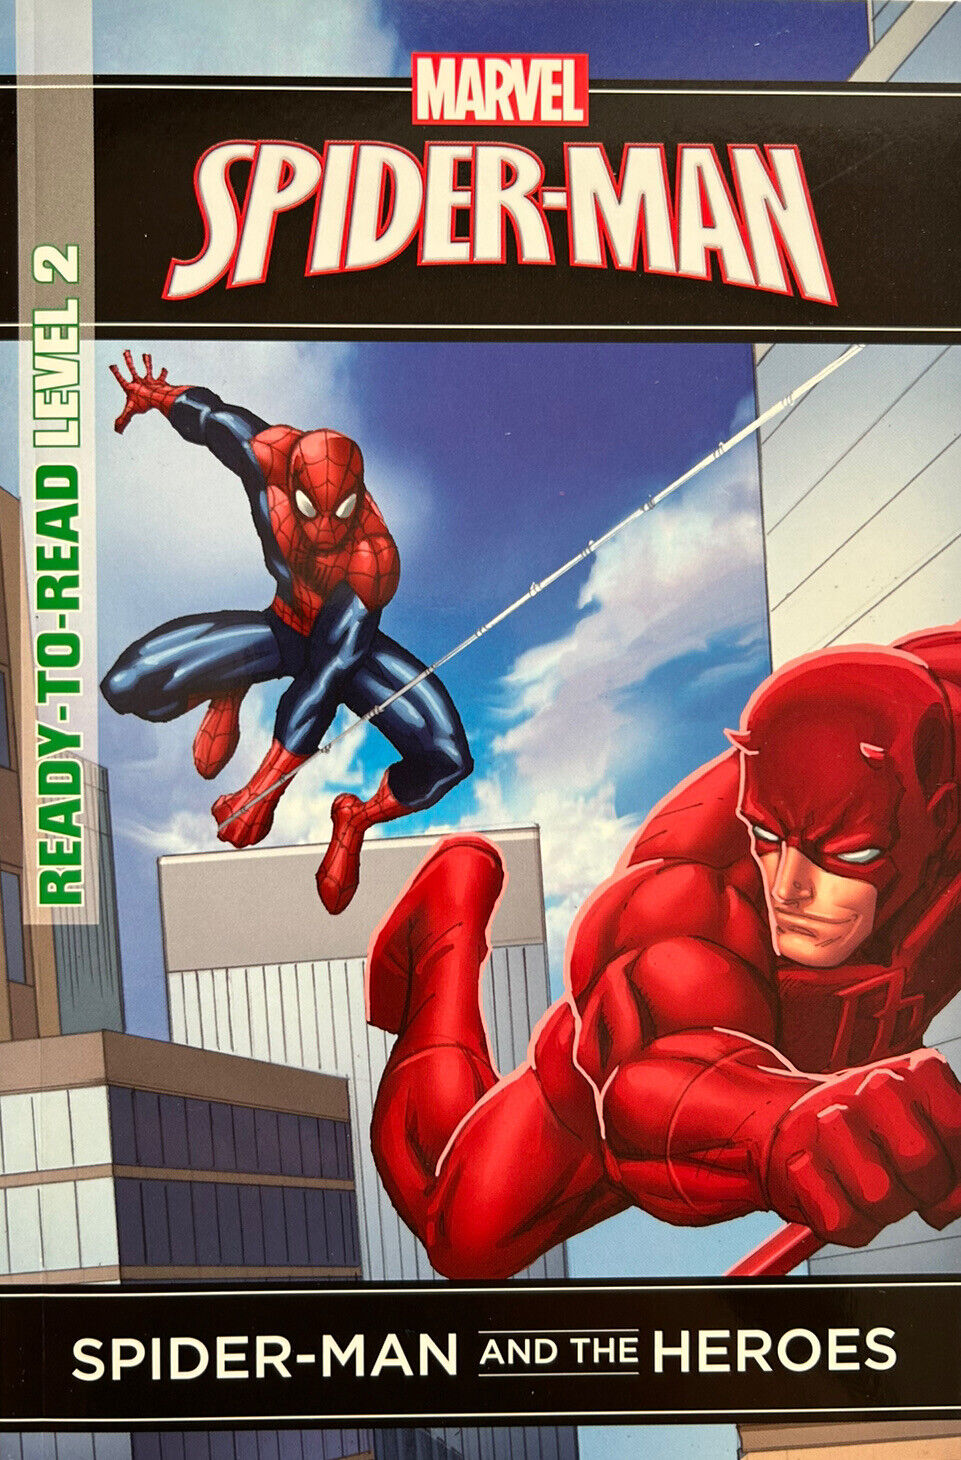 Marvel Books - SPIDER-MAN AND THE HEROES Ready-To-Read Level 2